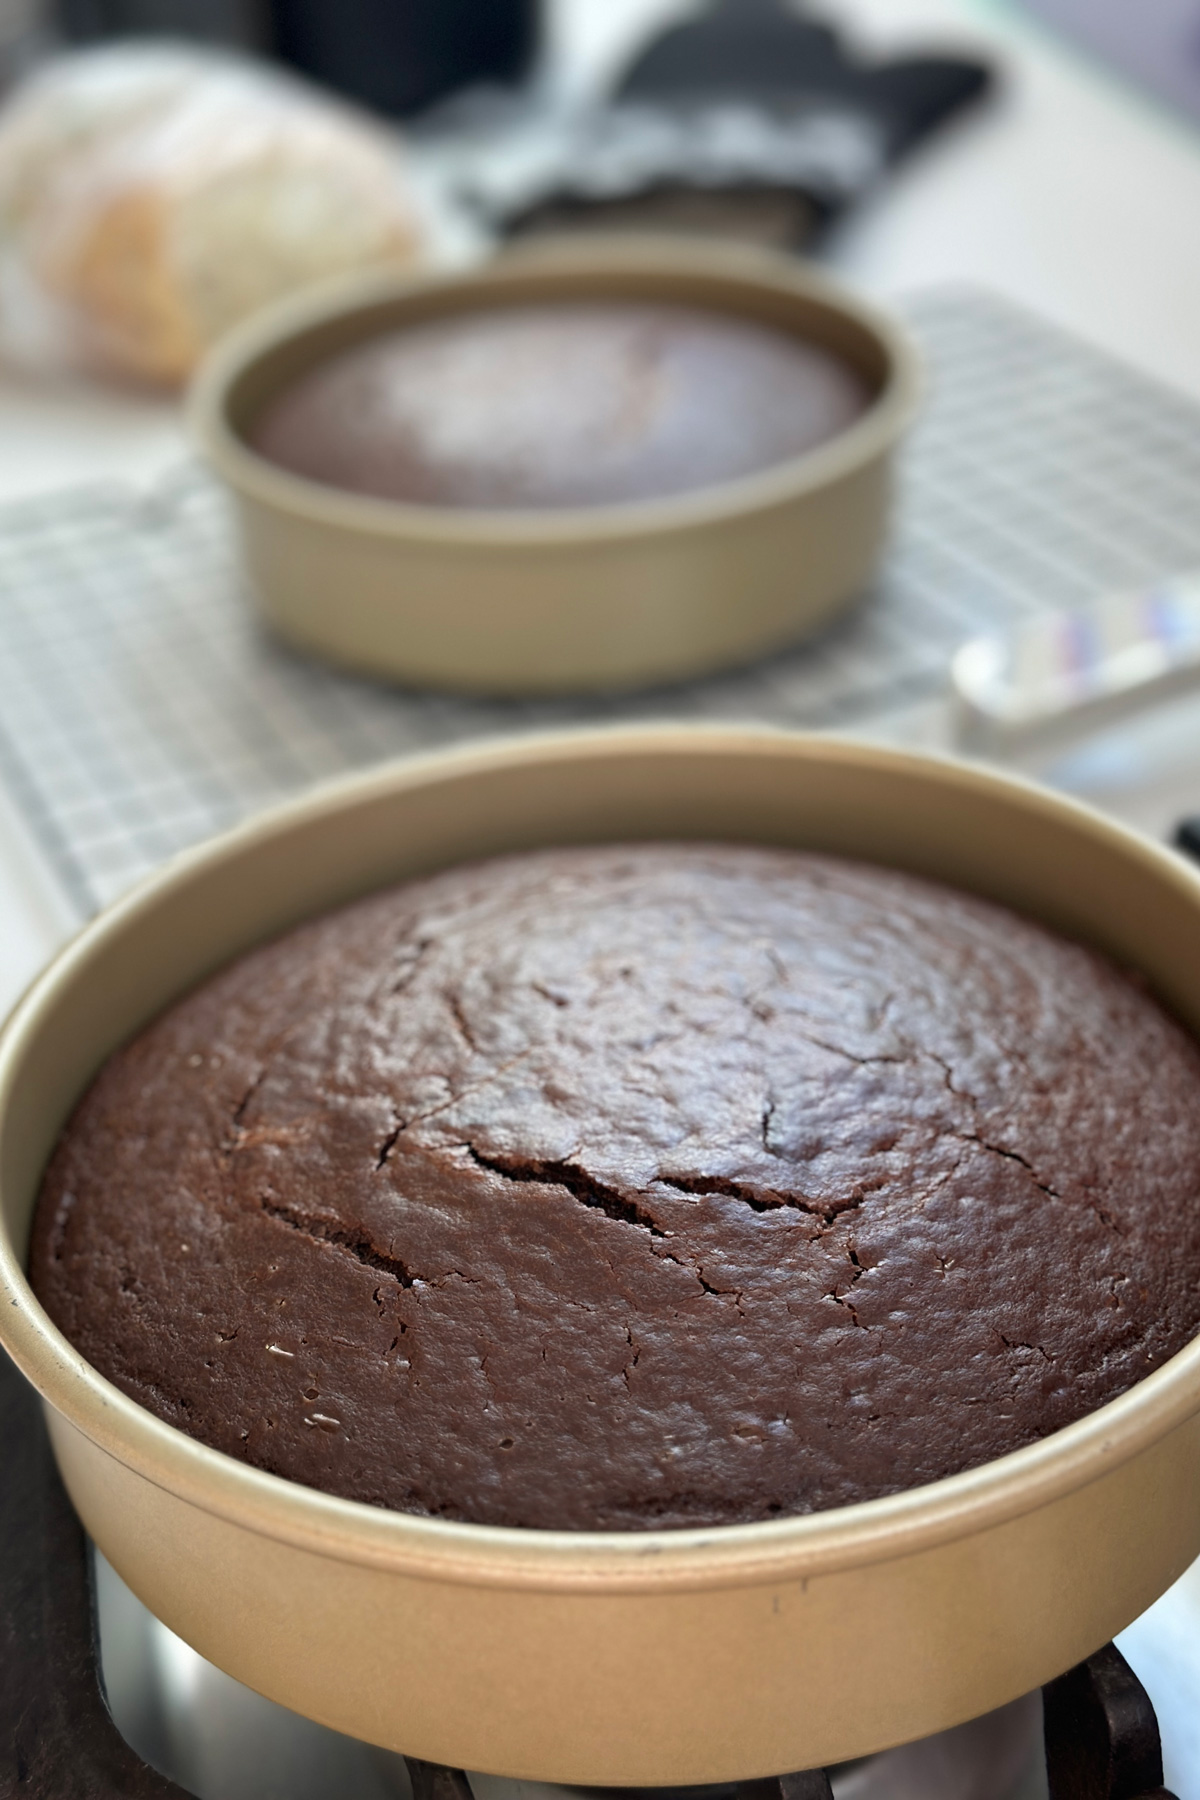 2 vegan chocolate cakes fresh out of the oven